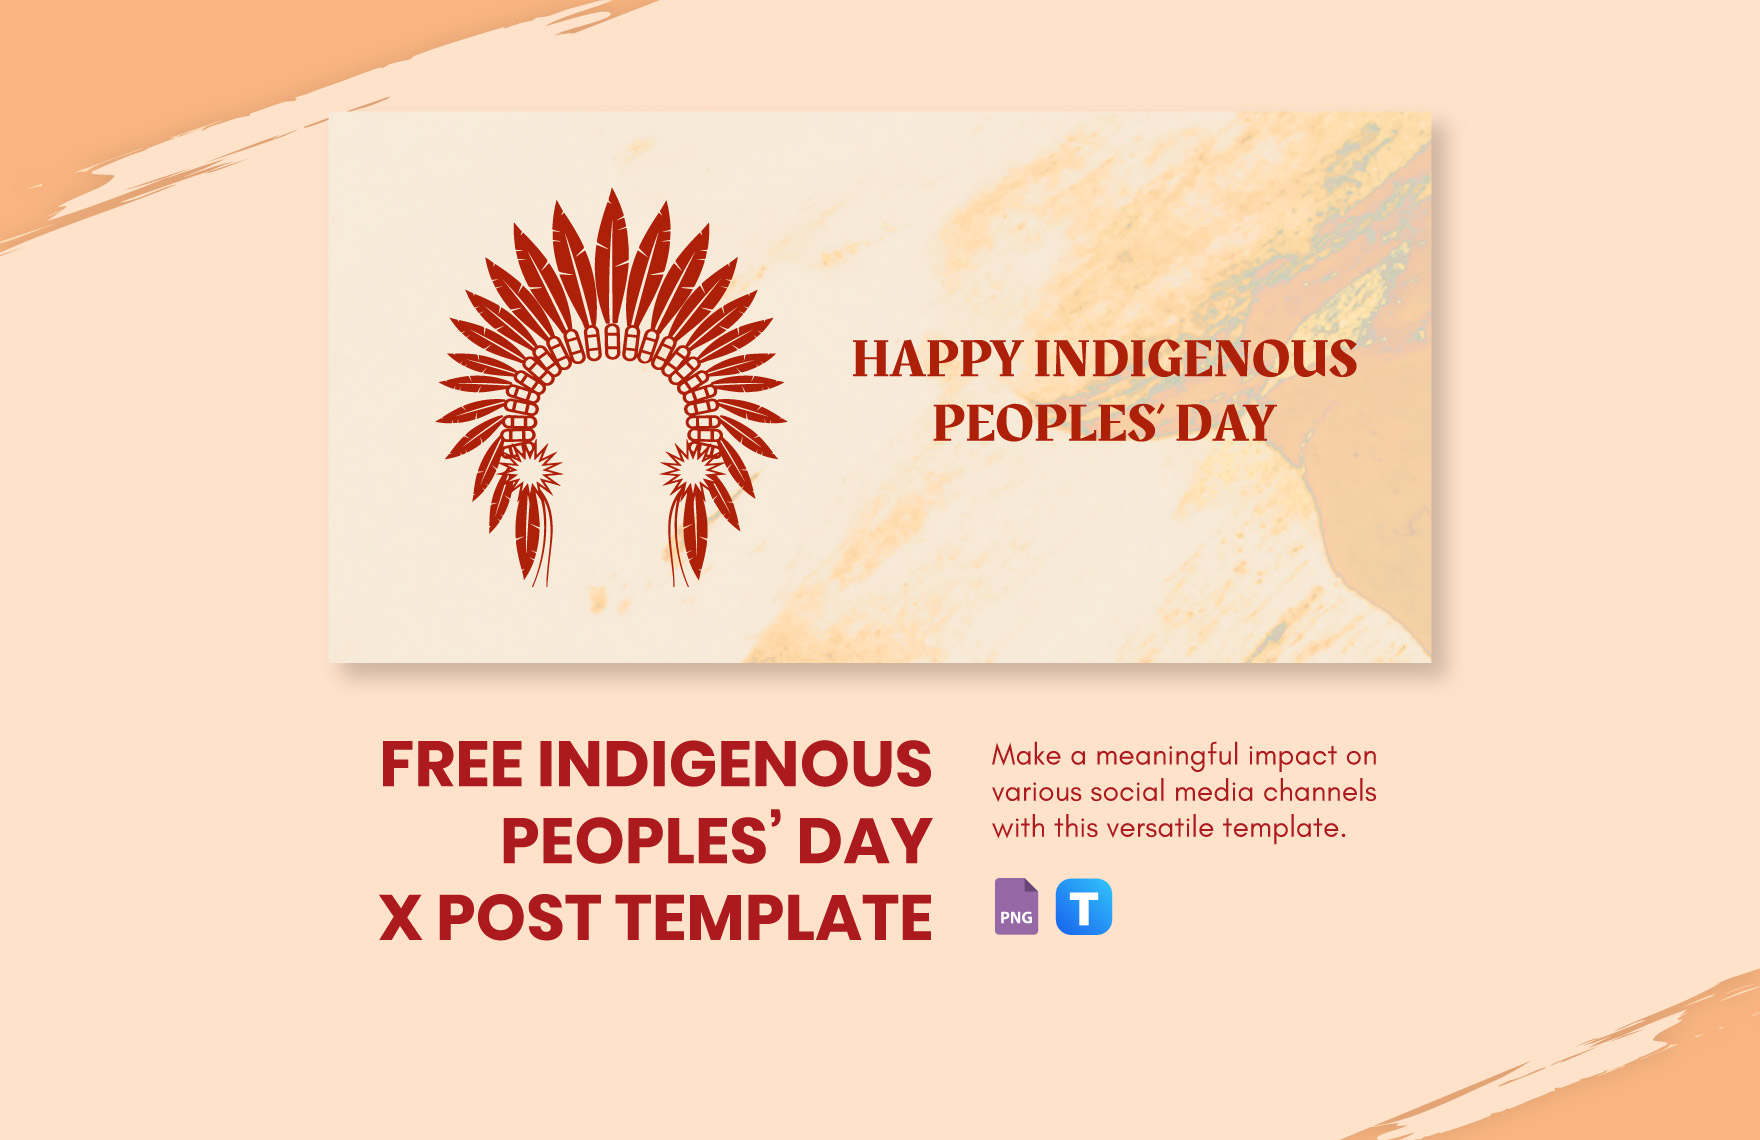 Free Indigenous Peoples' Day X Post Template in PNG